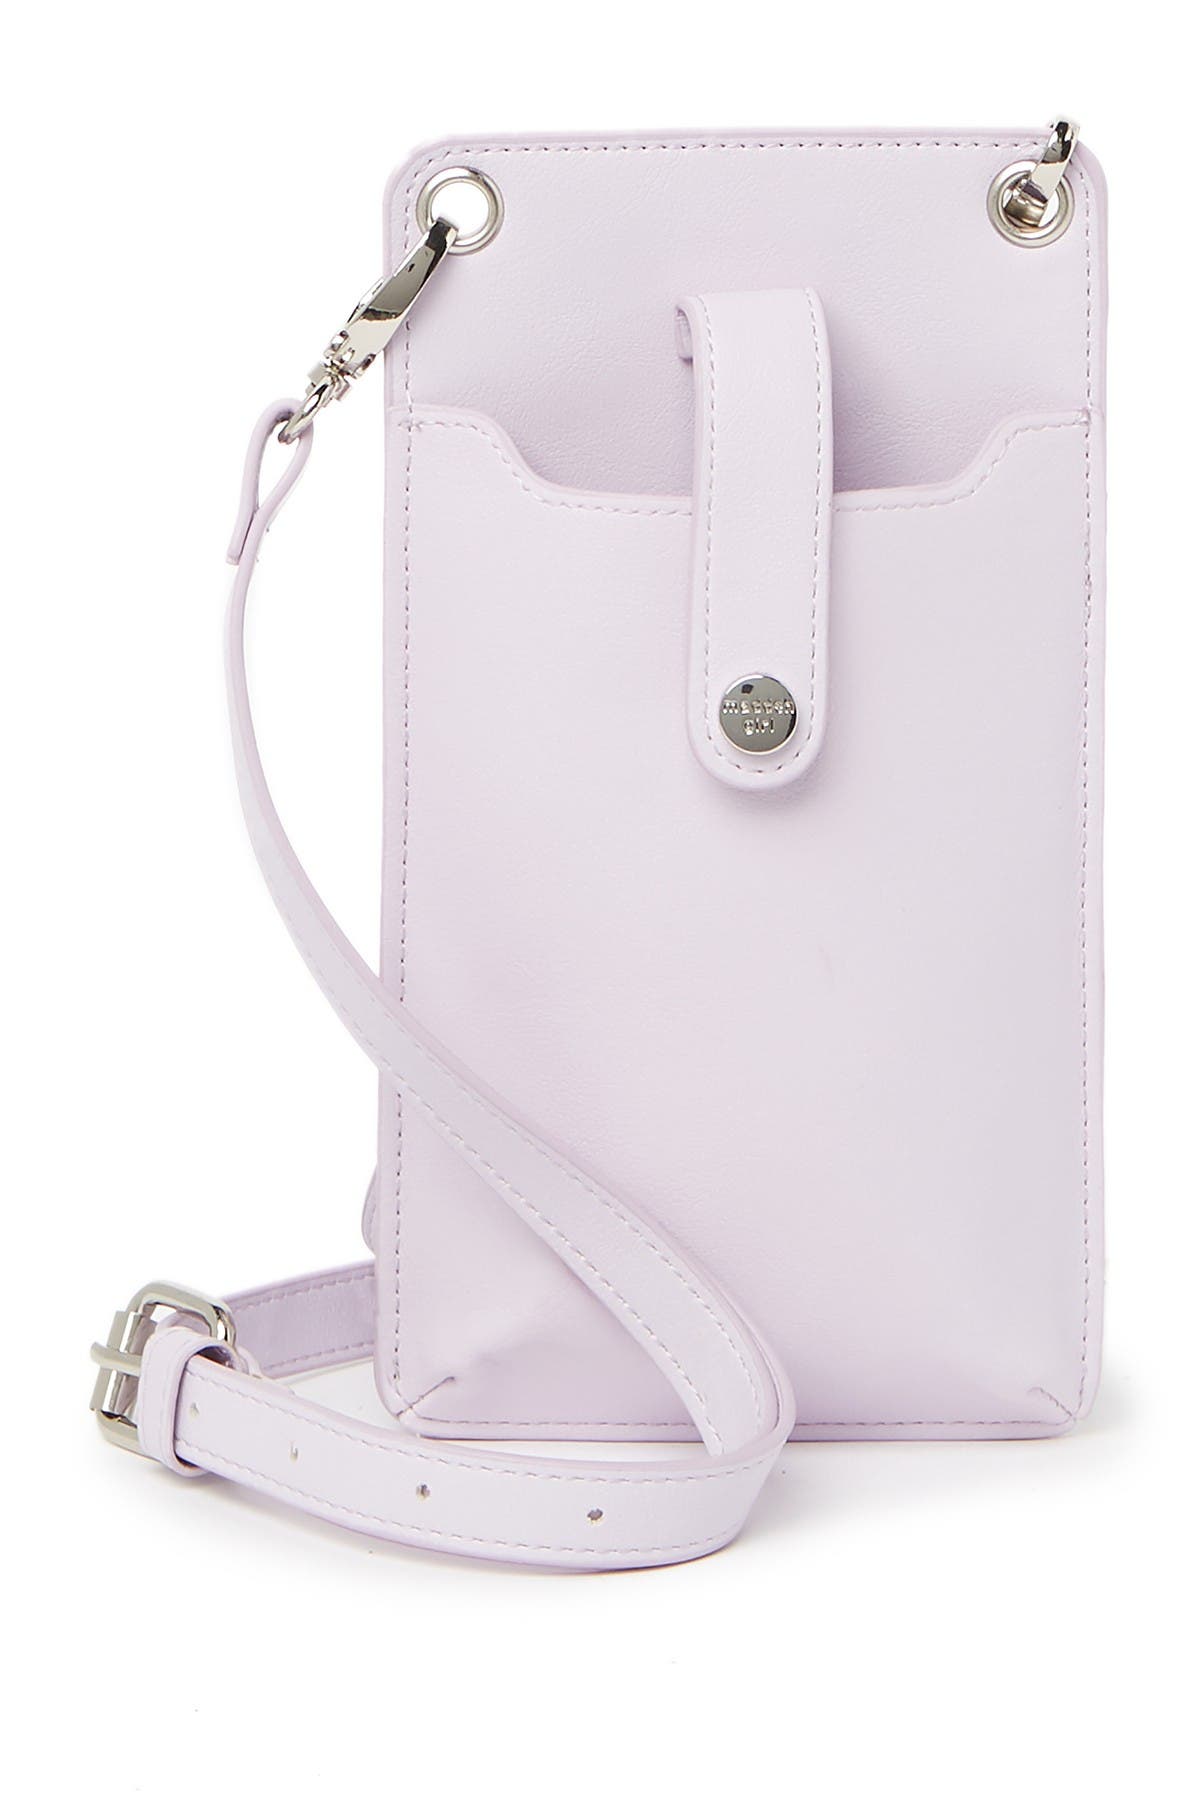 Madden Girl Cell Phone Crossbody In Lilac